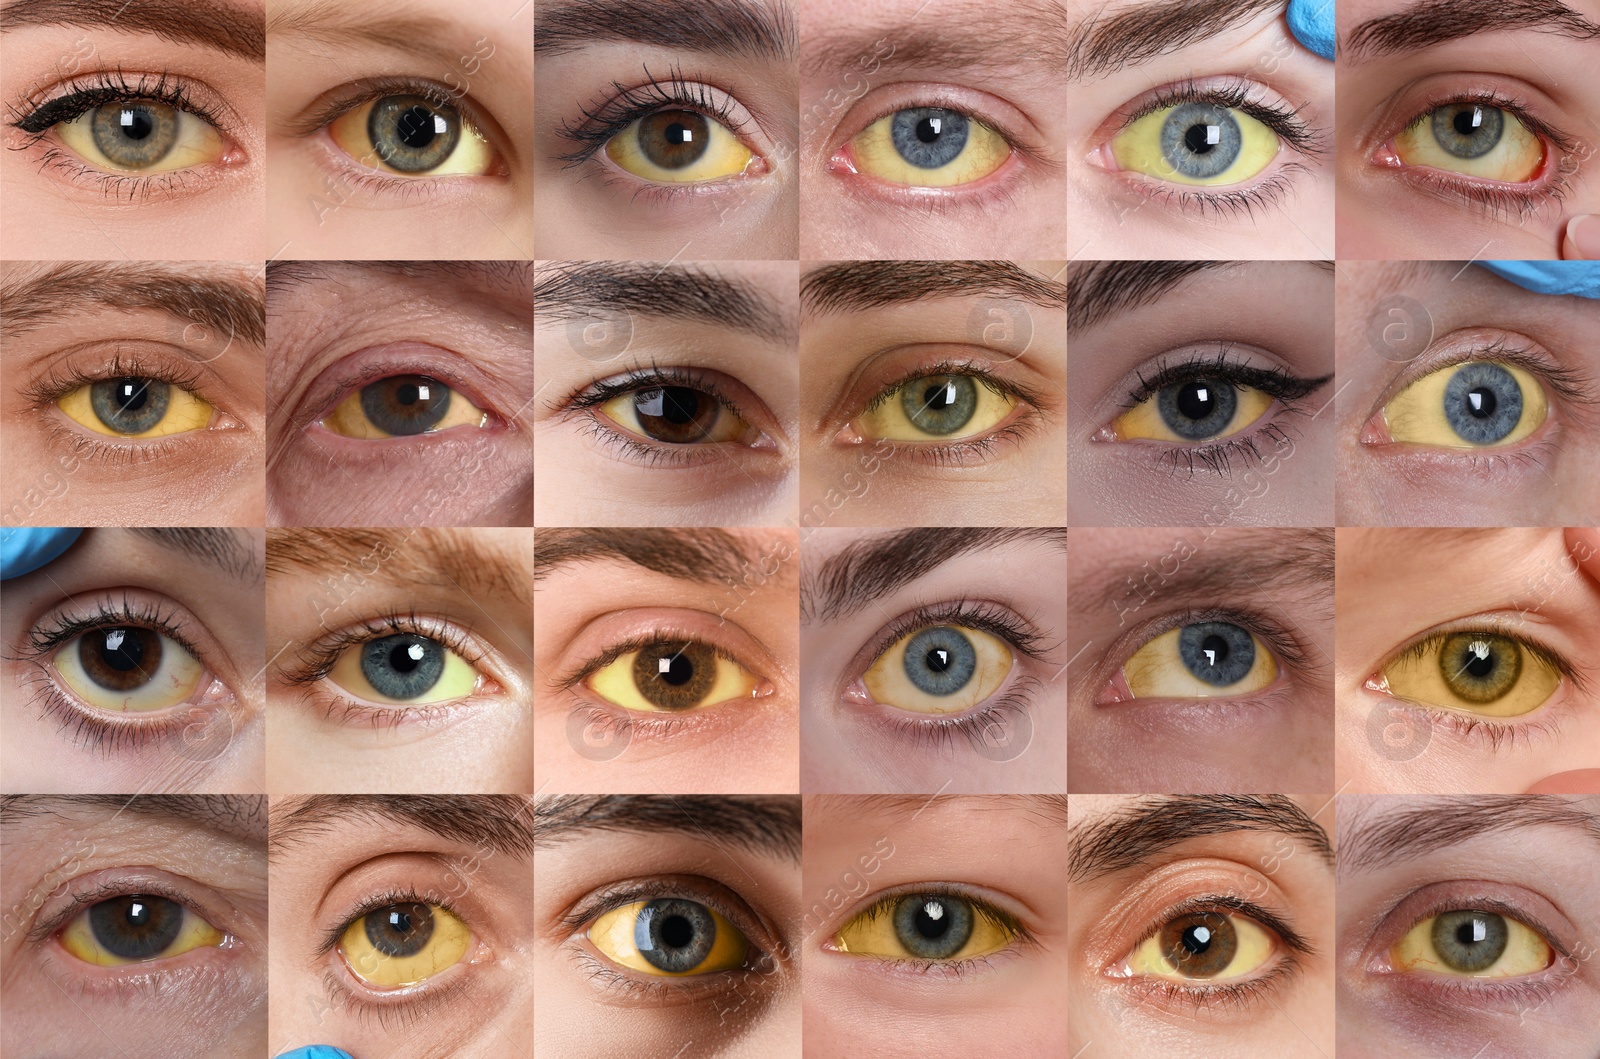 Image of Yellowing of eyes as symptom of hepatitis. Collage with photos of people